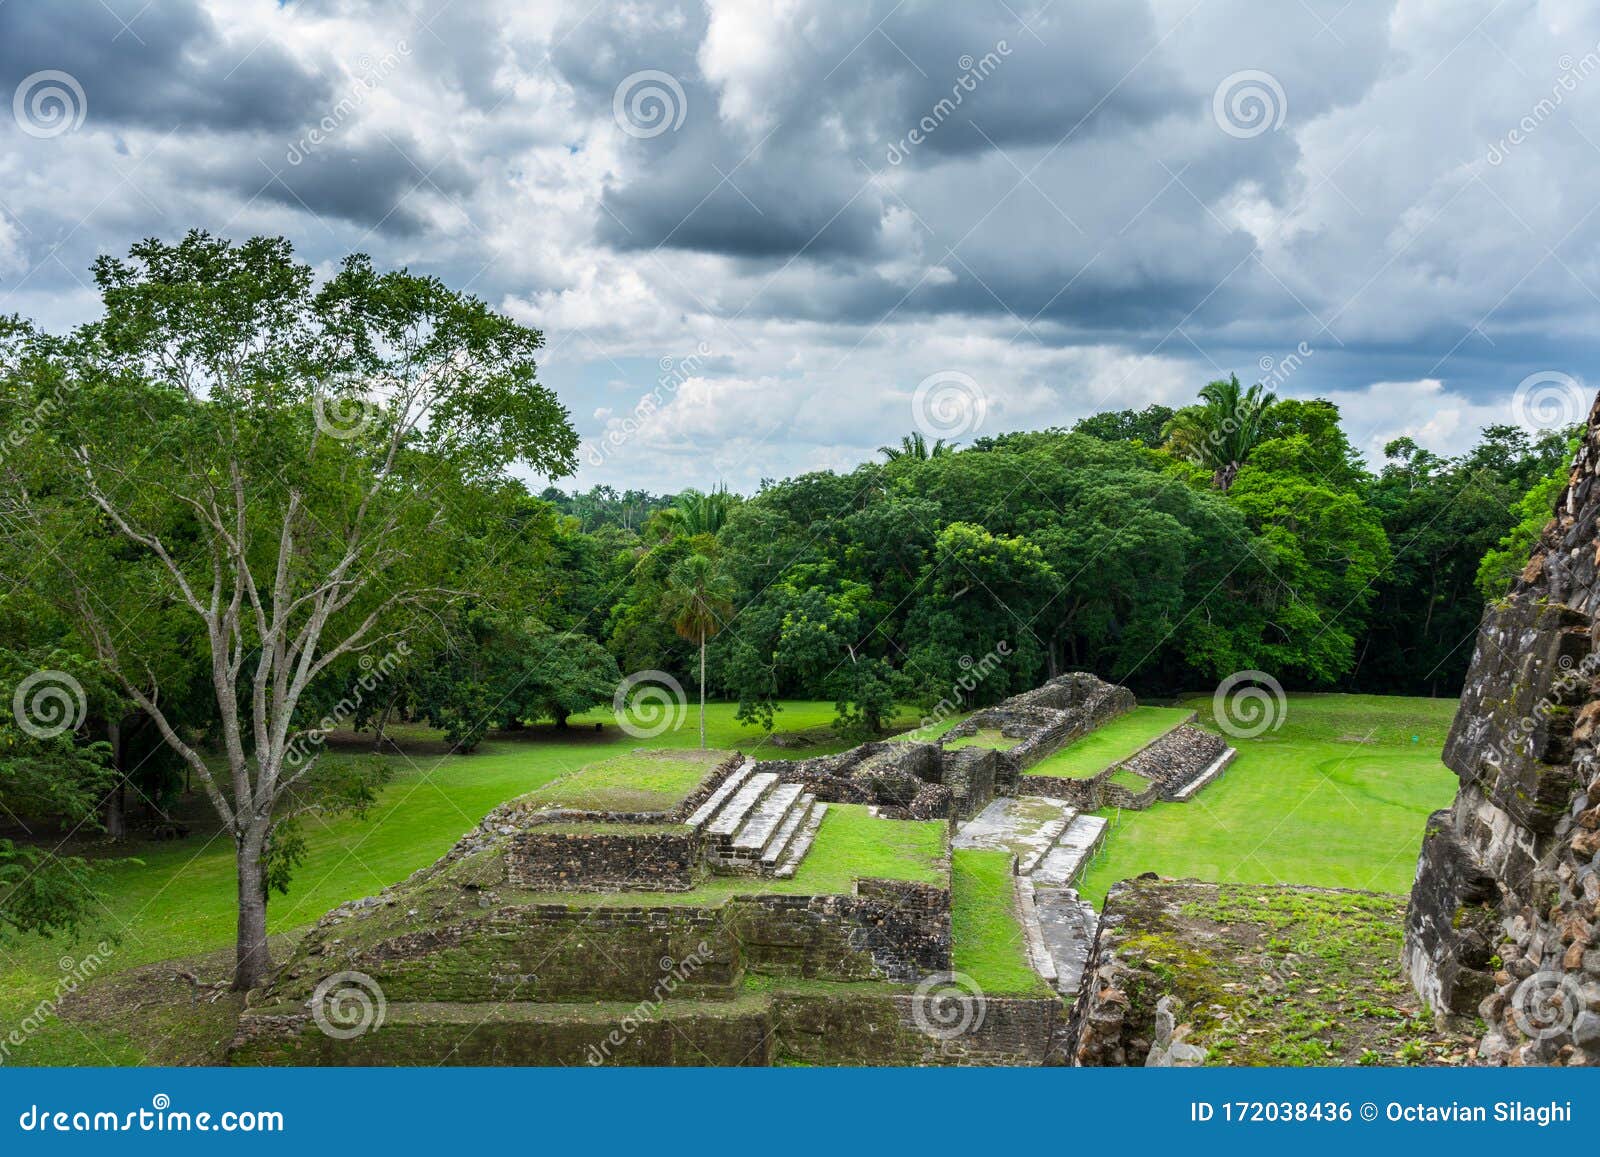 old ruins from the buildings of the mayan city of altun ha, belize